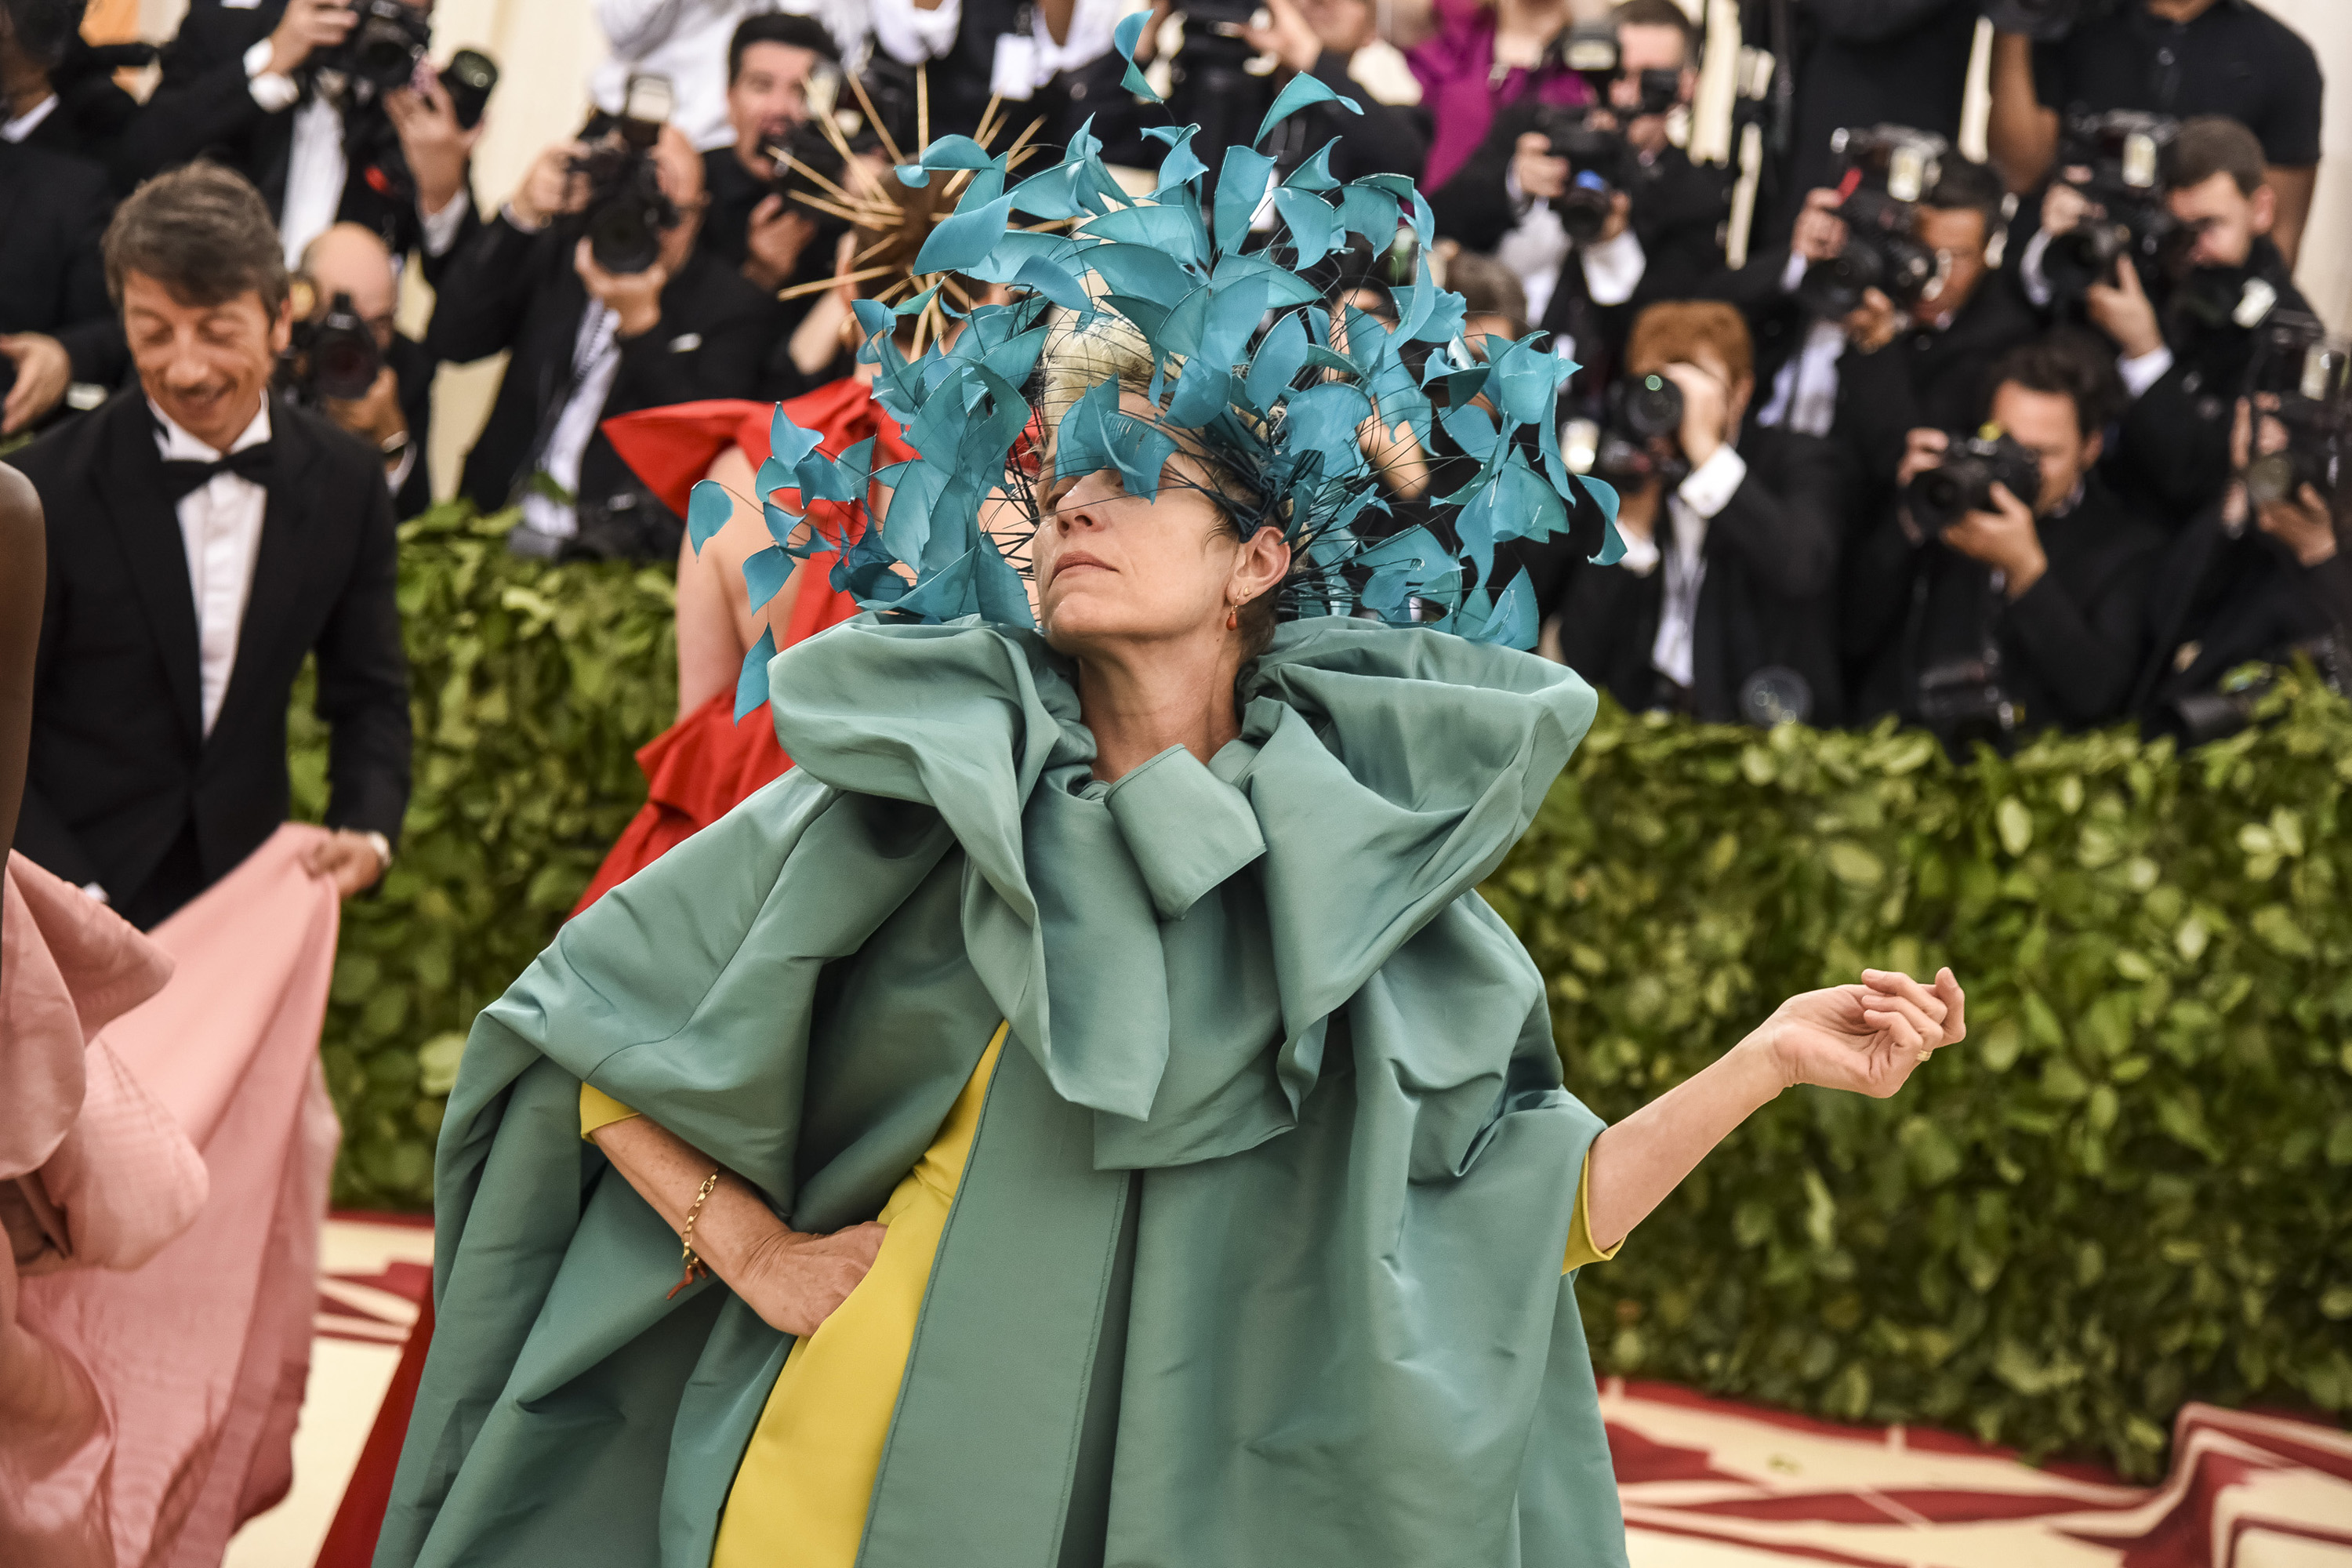 The Met Gala: who stood out and who fell flat – Eagle Eye News